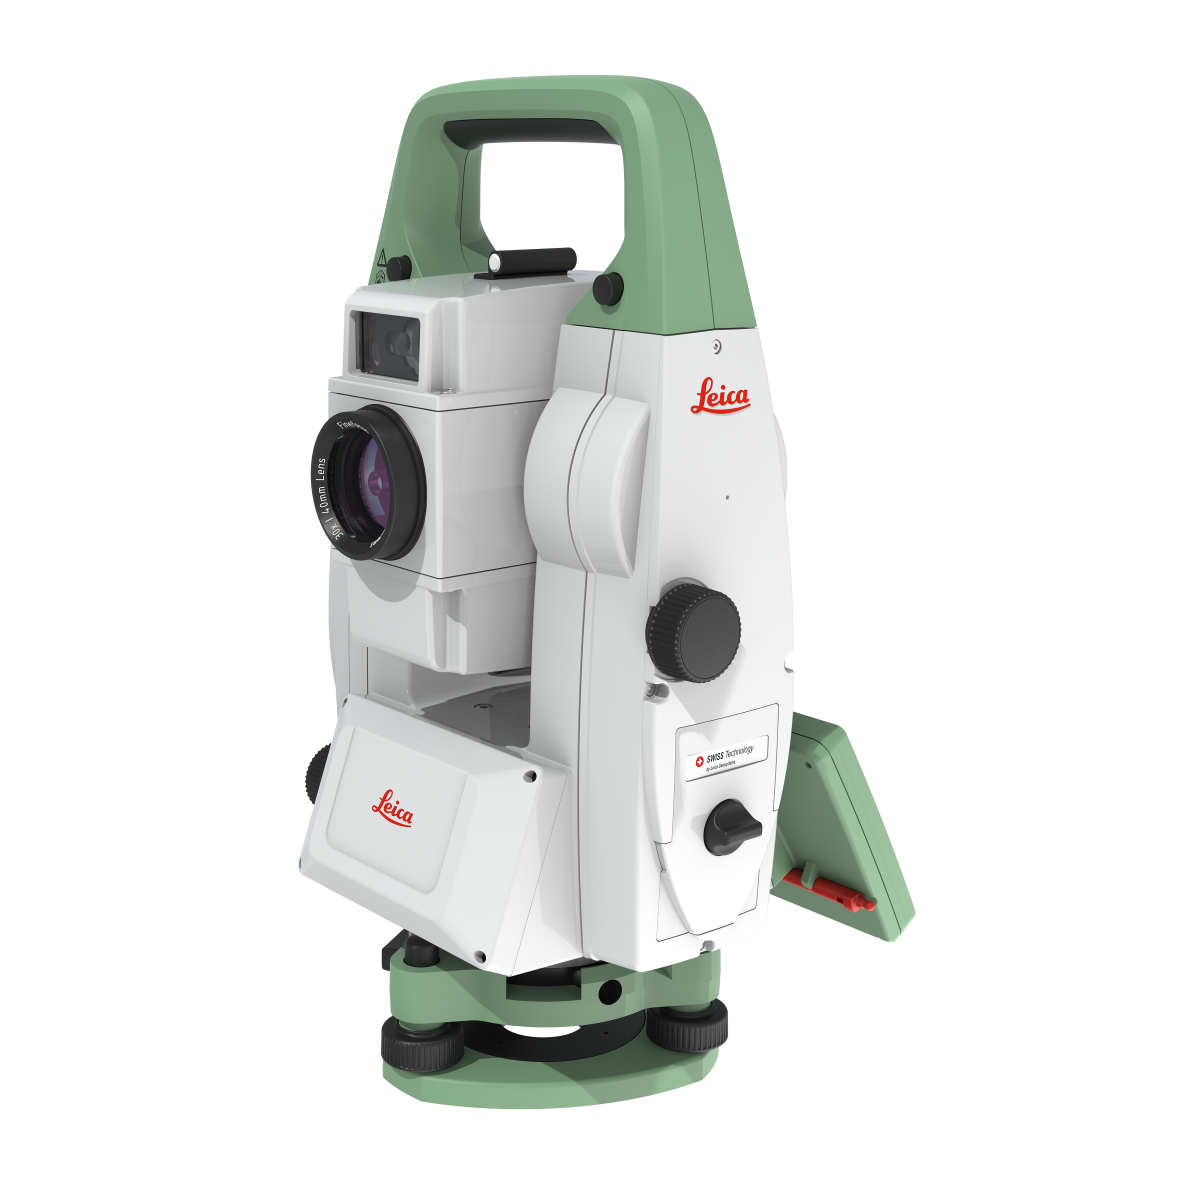 Leica GTS46, LOC8 theft deterrence and location device for automated total stations